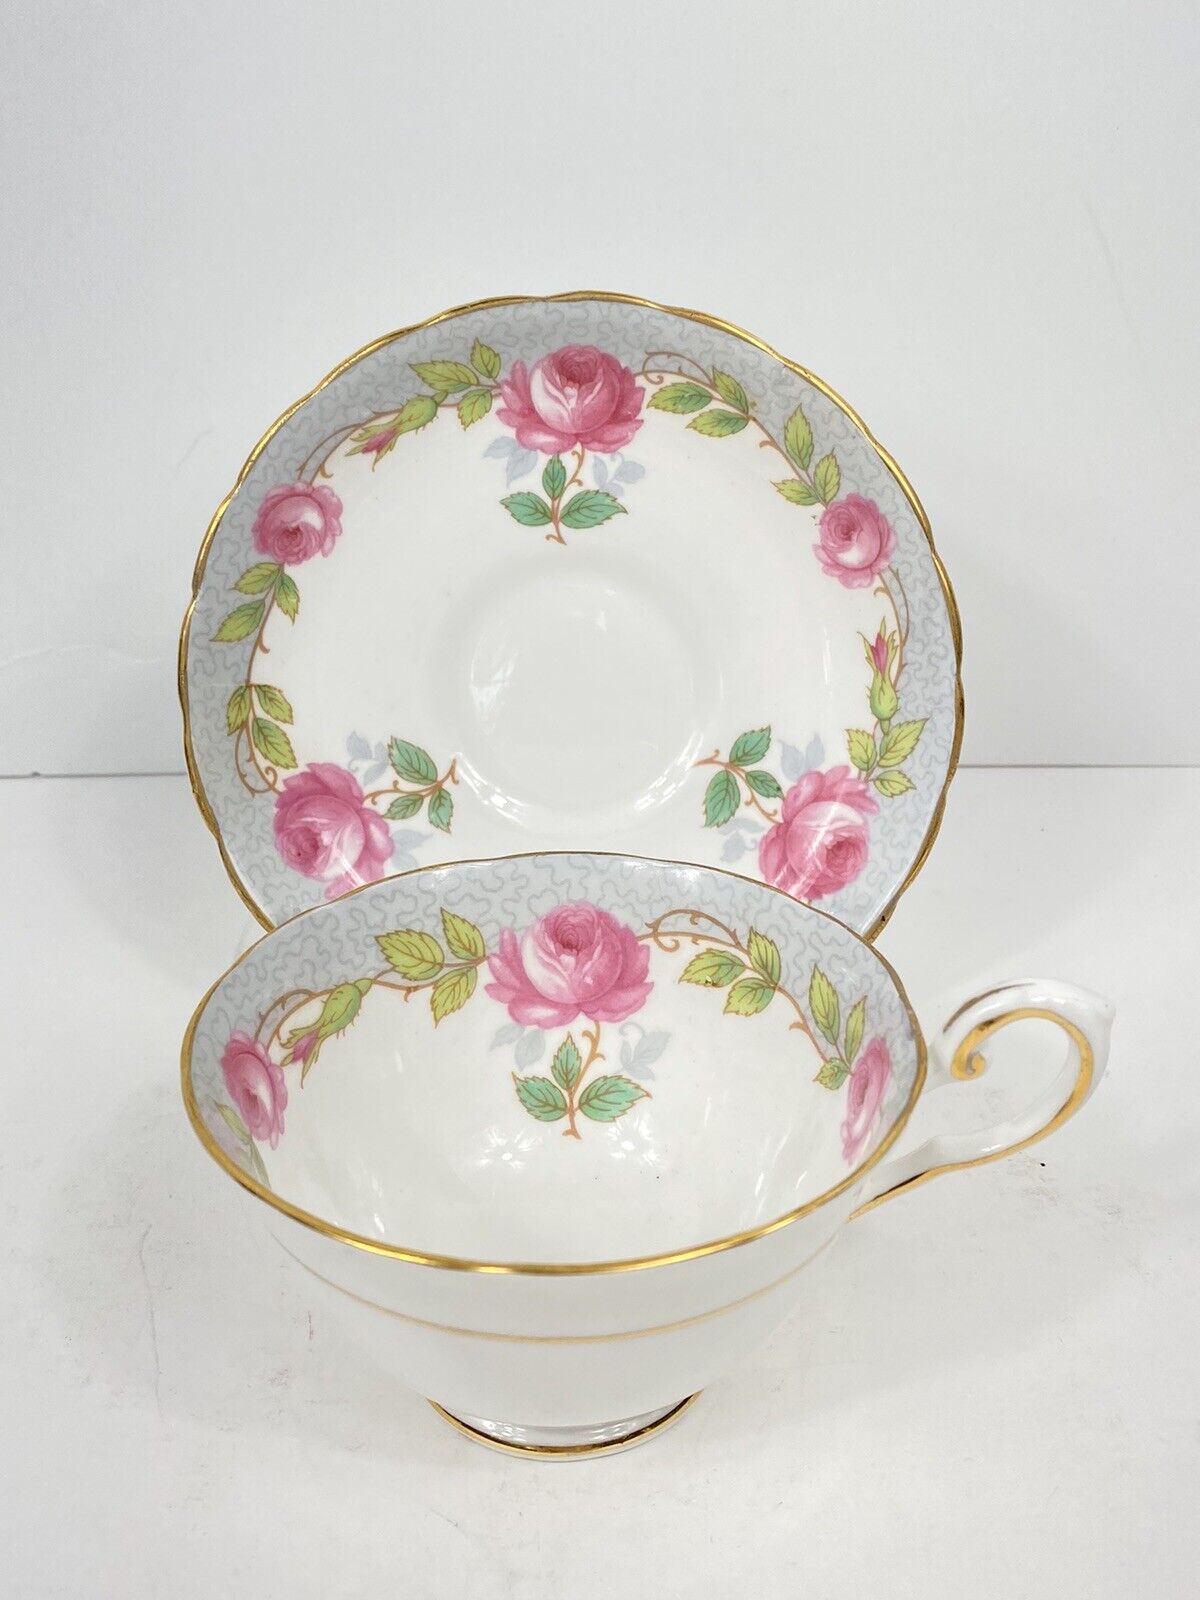 Vintage ROYAL TUSCAN England Cup & Saucer Pink Cabbage Roses Floral Teacup(s)